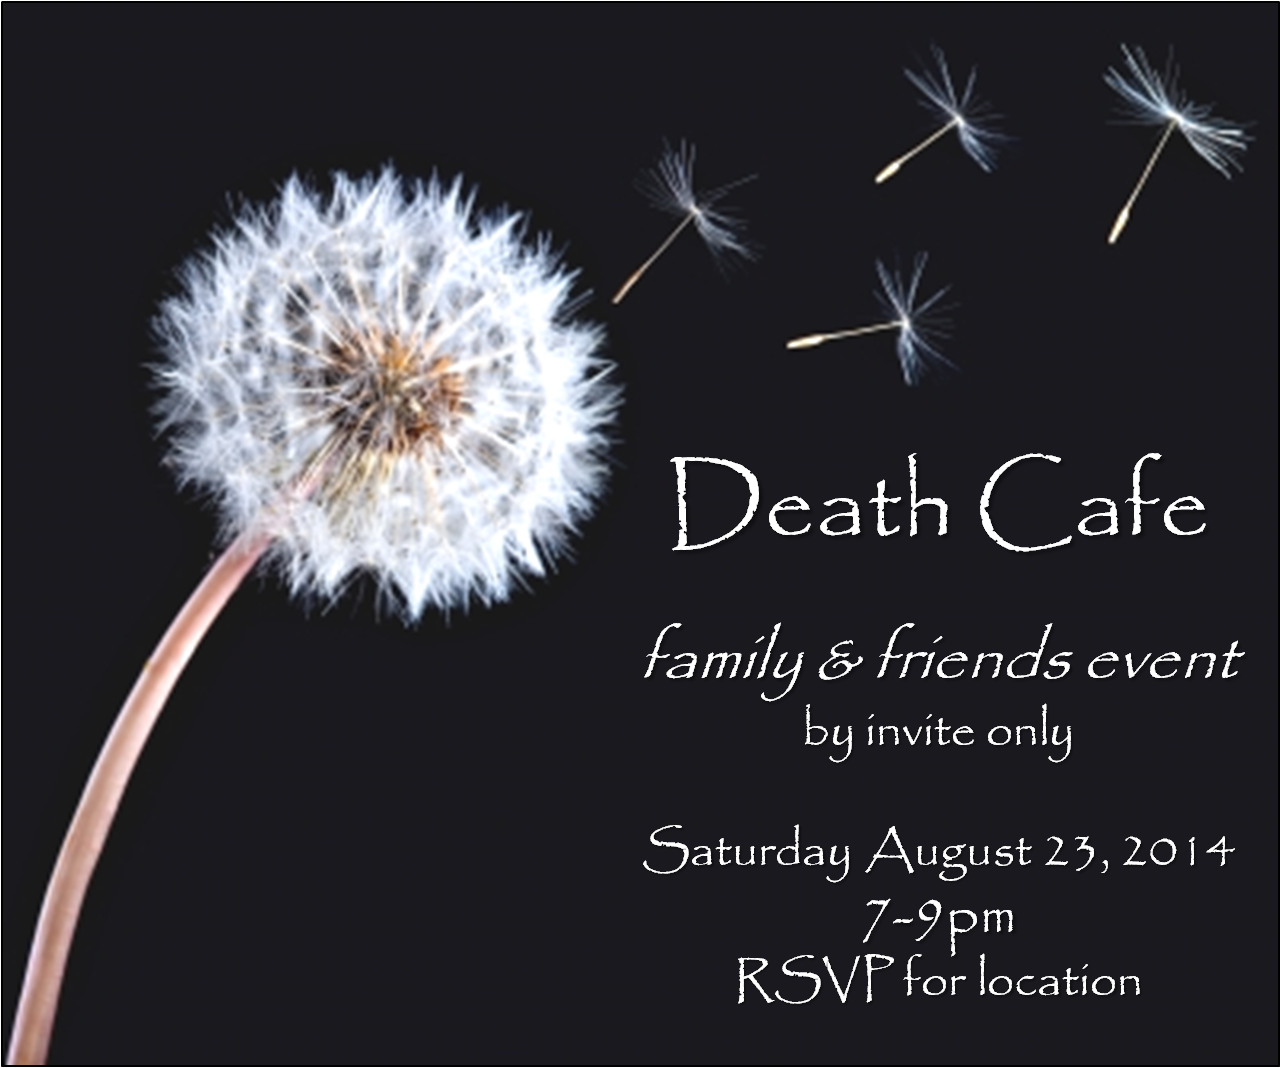 Death Cafe - family & friends event